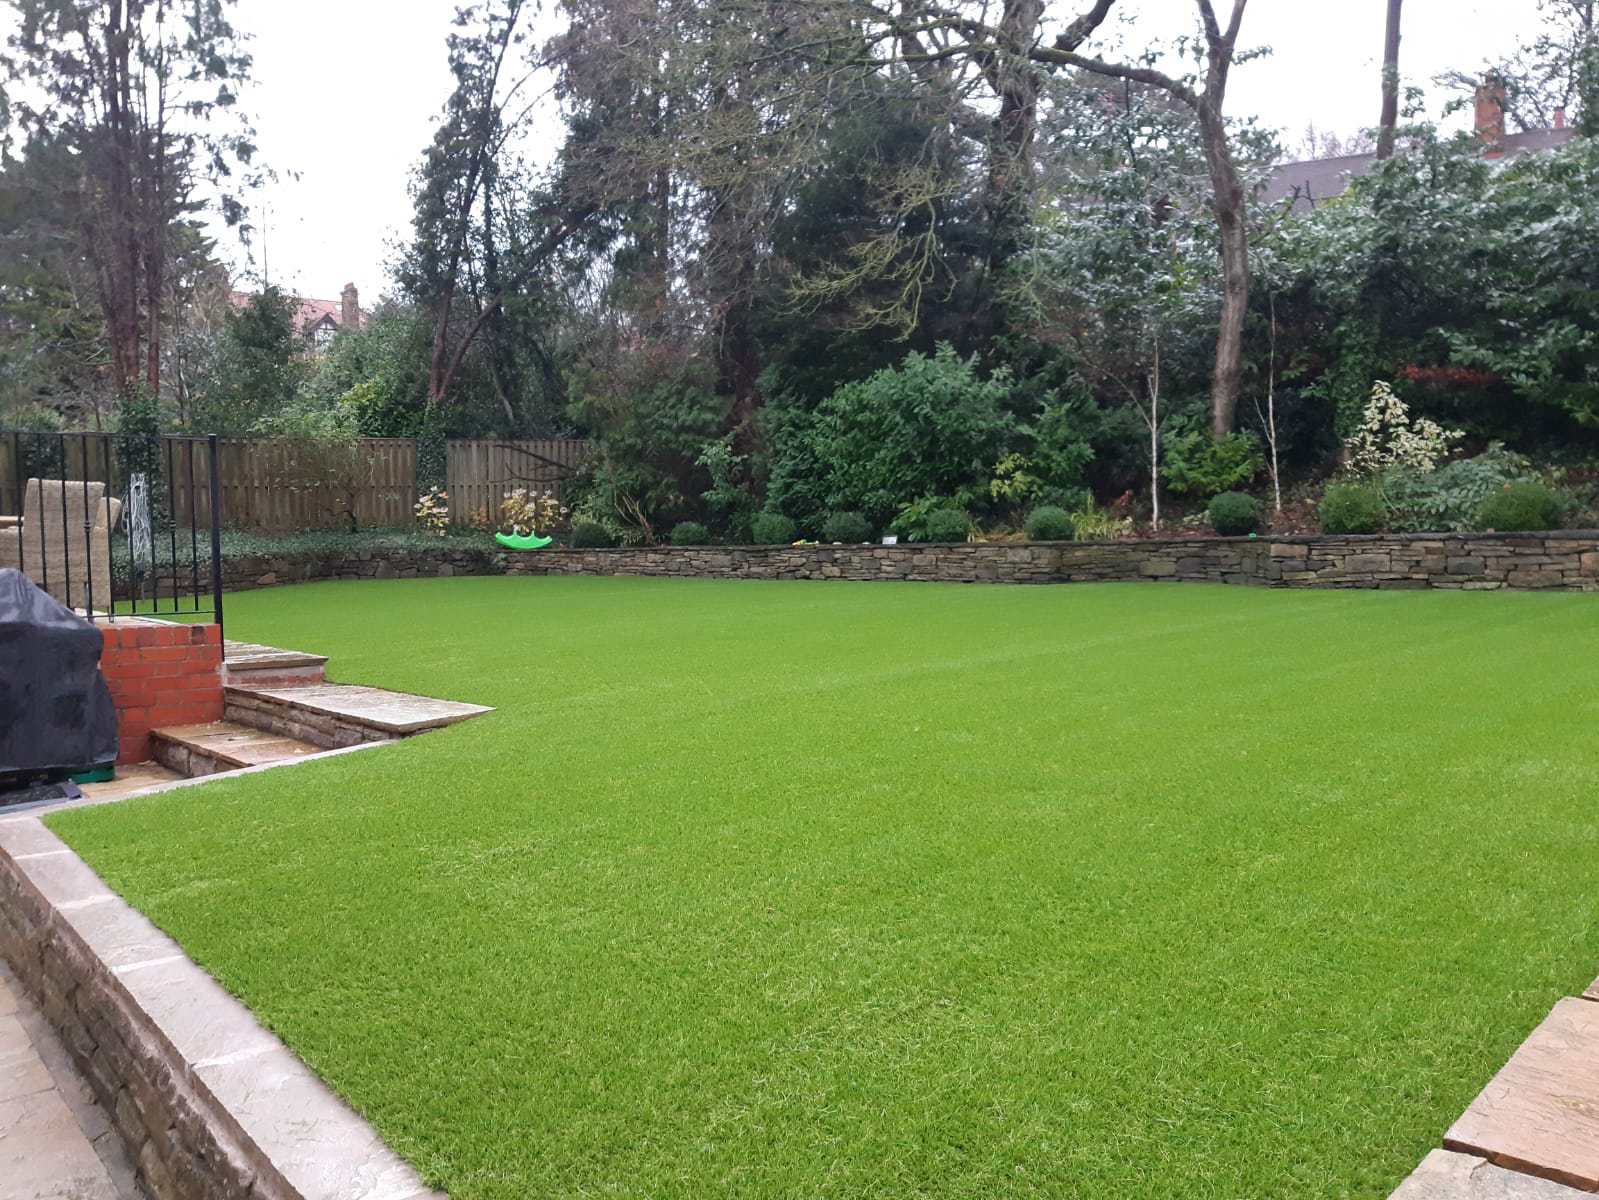 Big family garden installed with artificial grass.